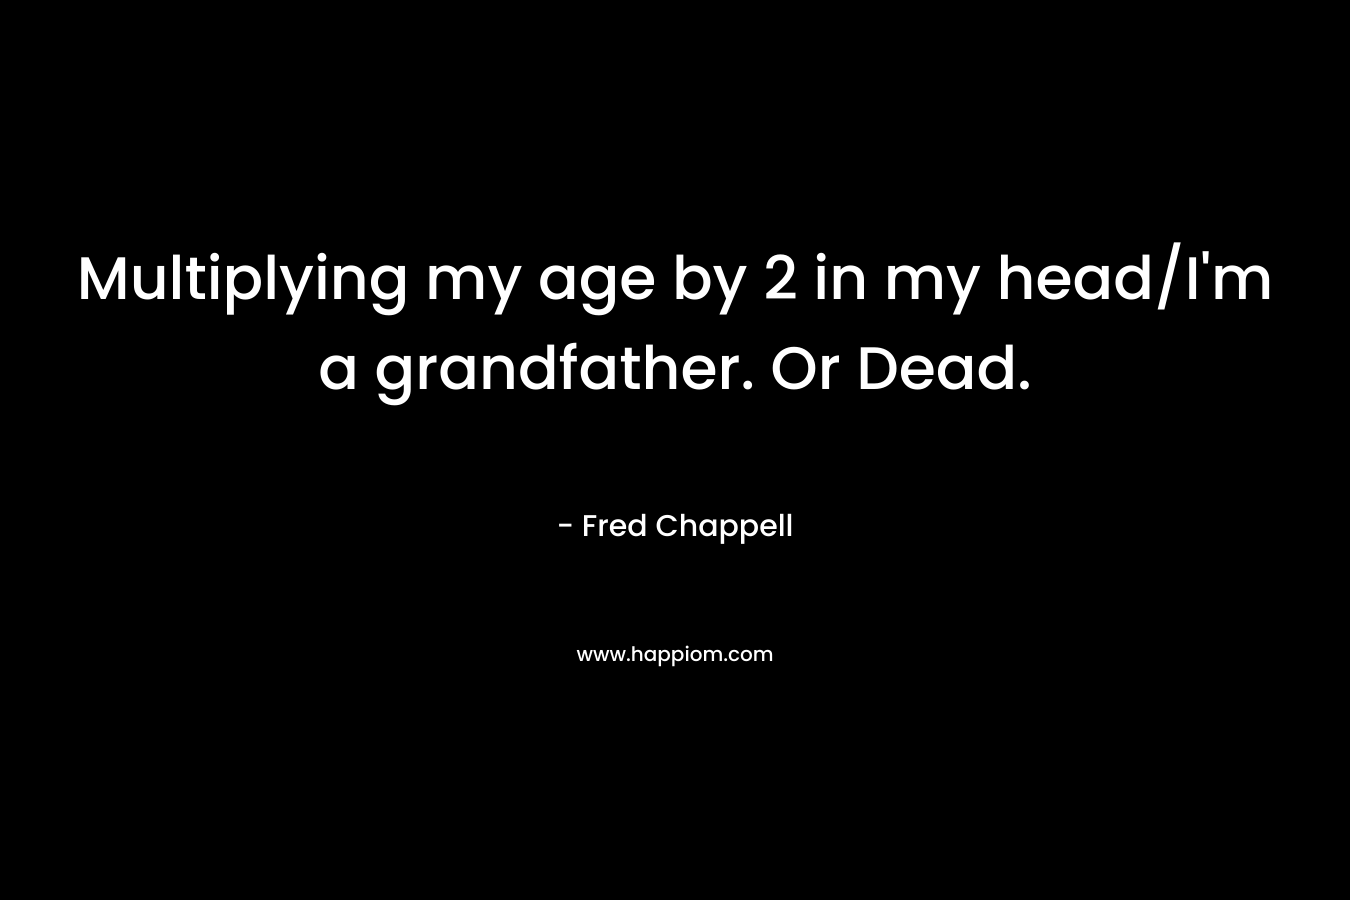 Multiplying my age by 2 in my head/I’m a grandfather. Or Dead. – Fred Chappell